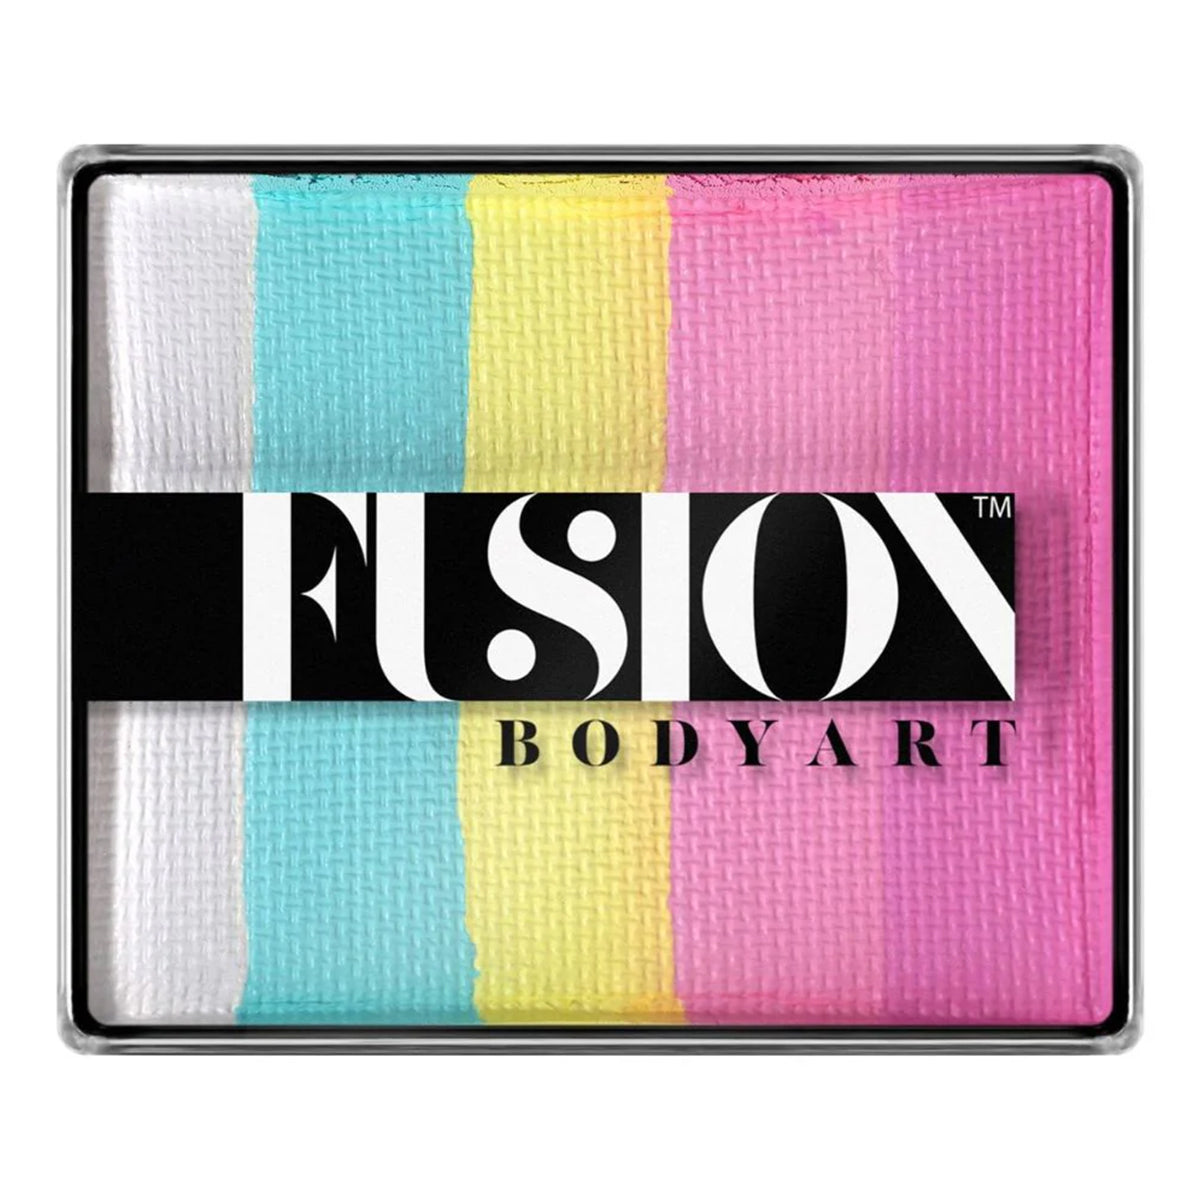 Fusion Body Art Rainbow Cake - Lodie Up - Cotton Candy (40 gm)